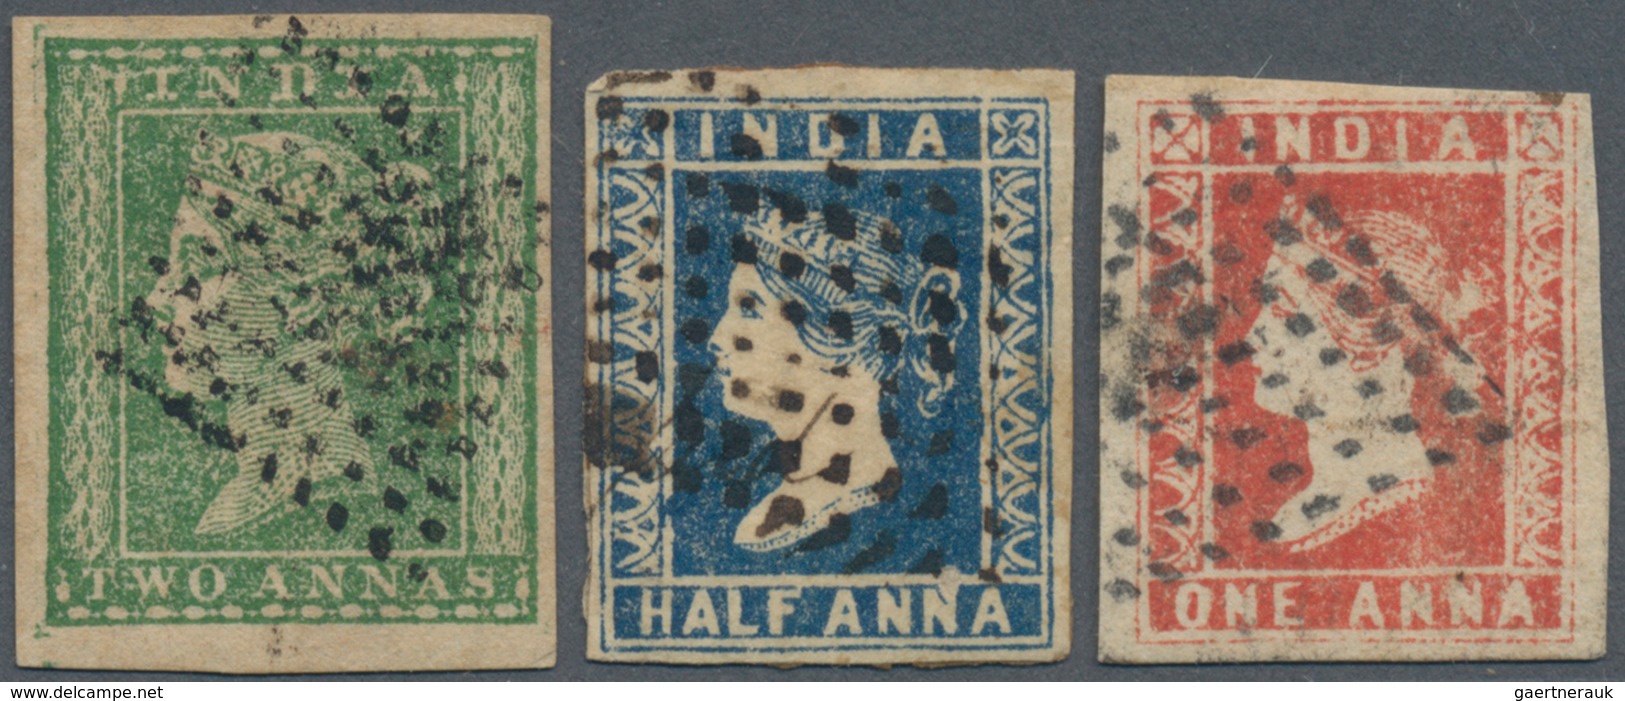 Indien: 1854/1855, Lithographed Issue, ½a. Blue, 1a. Red And 2a. Green, Three Used Stamps. - 1854 Compagnie Des Indes